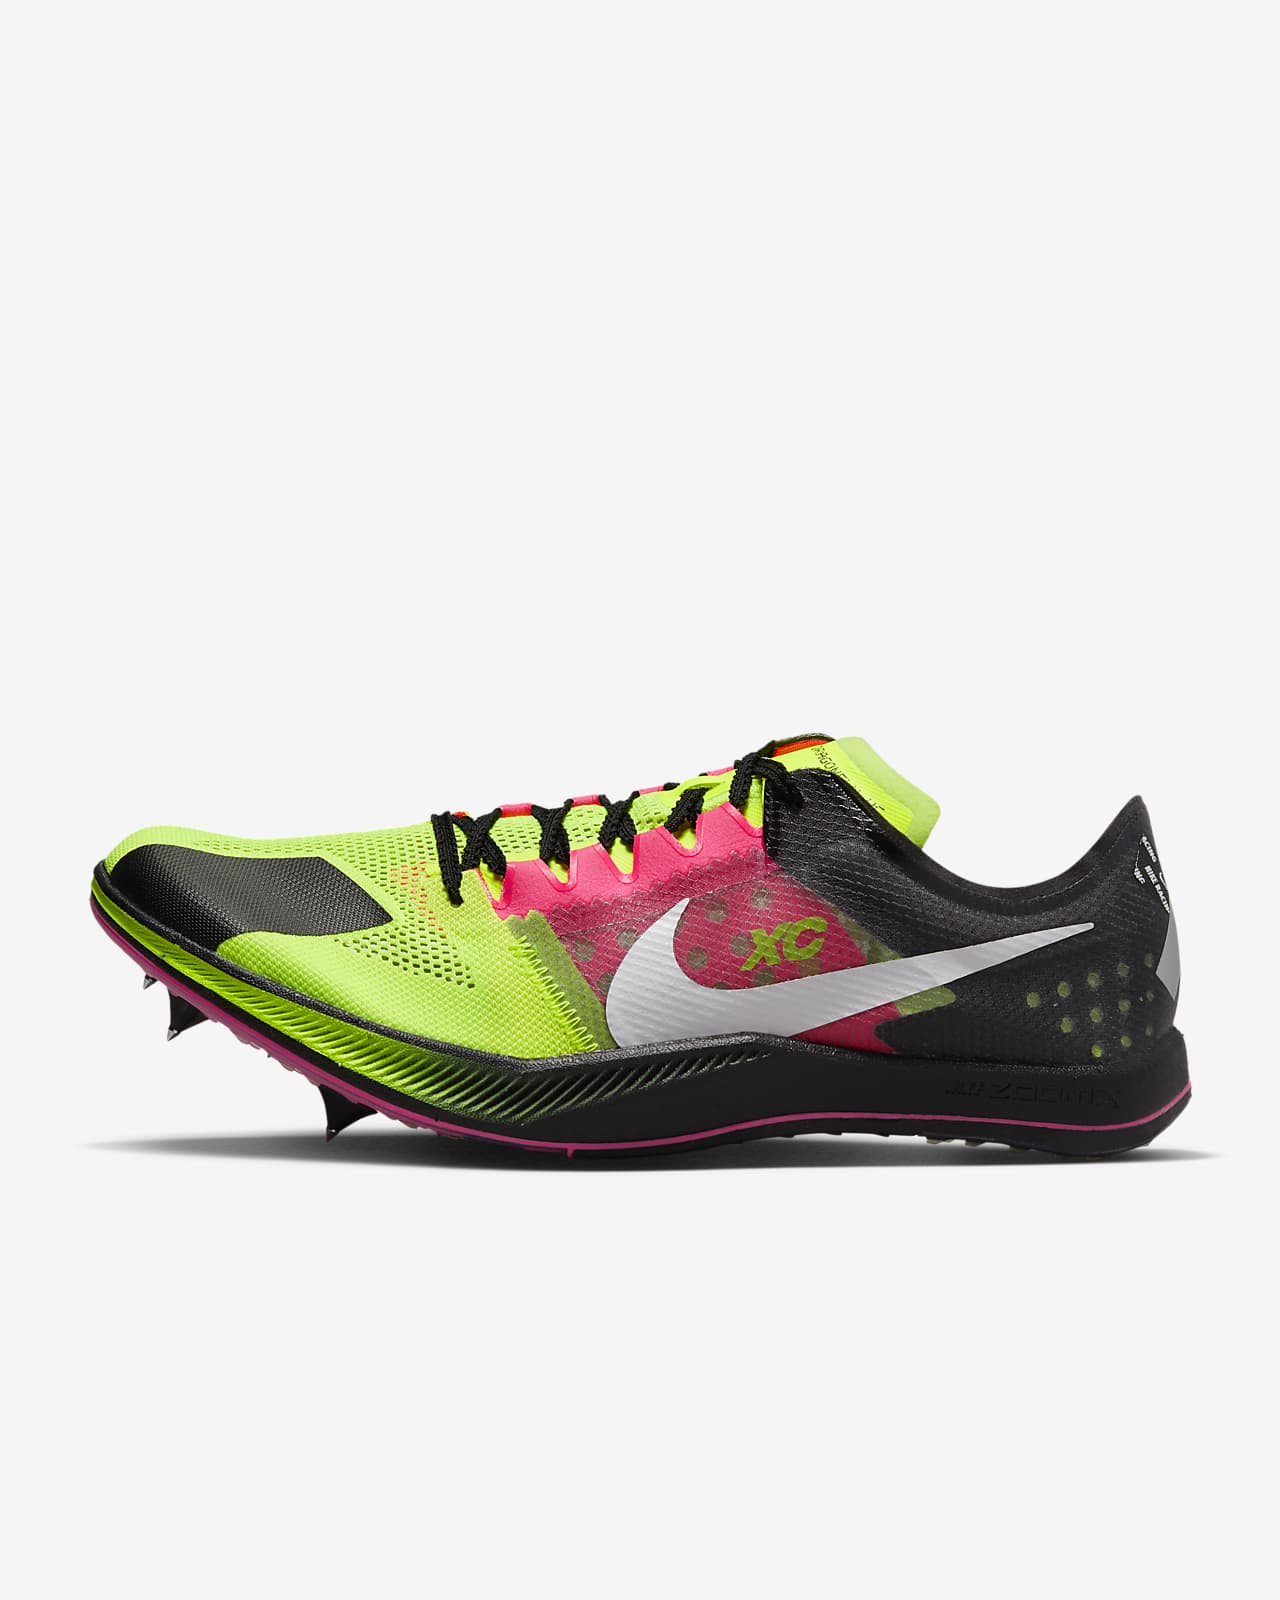 Nike ZoomX Dragonfly XC Cross-Country Spikes. Nike LU